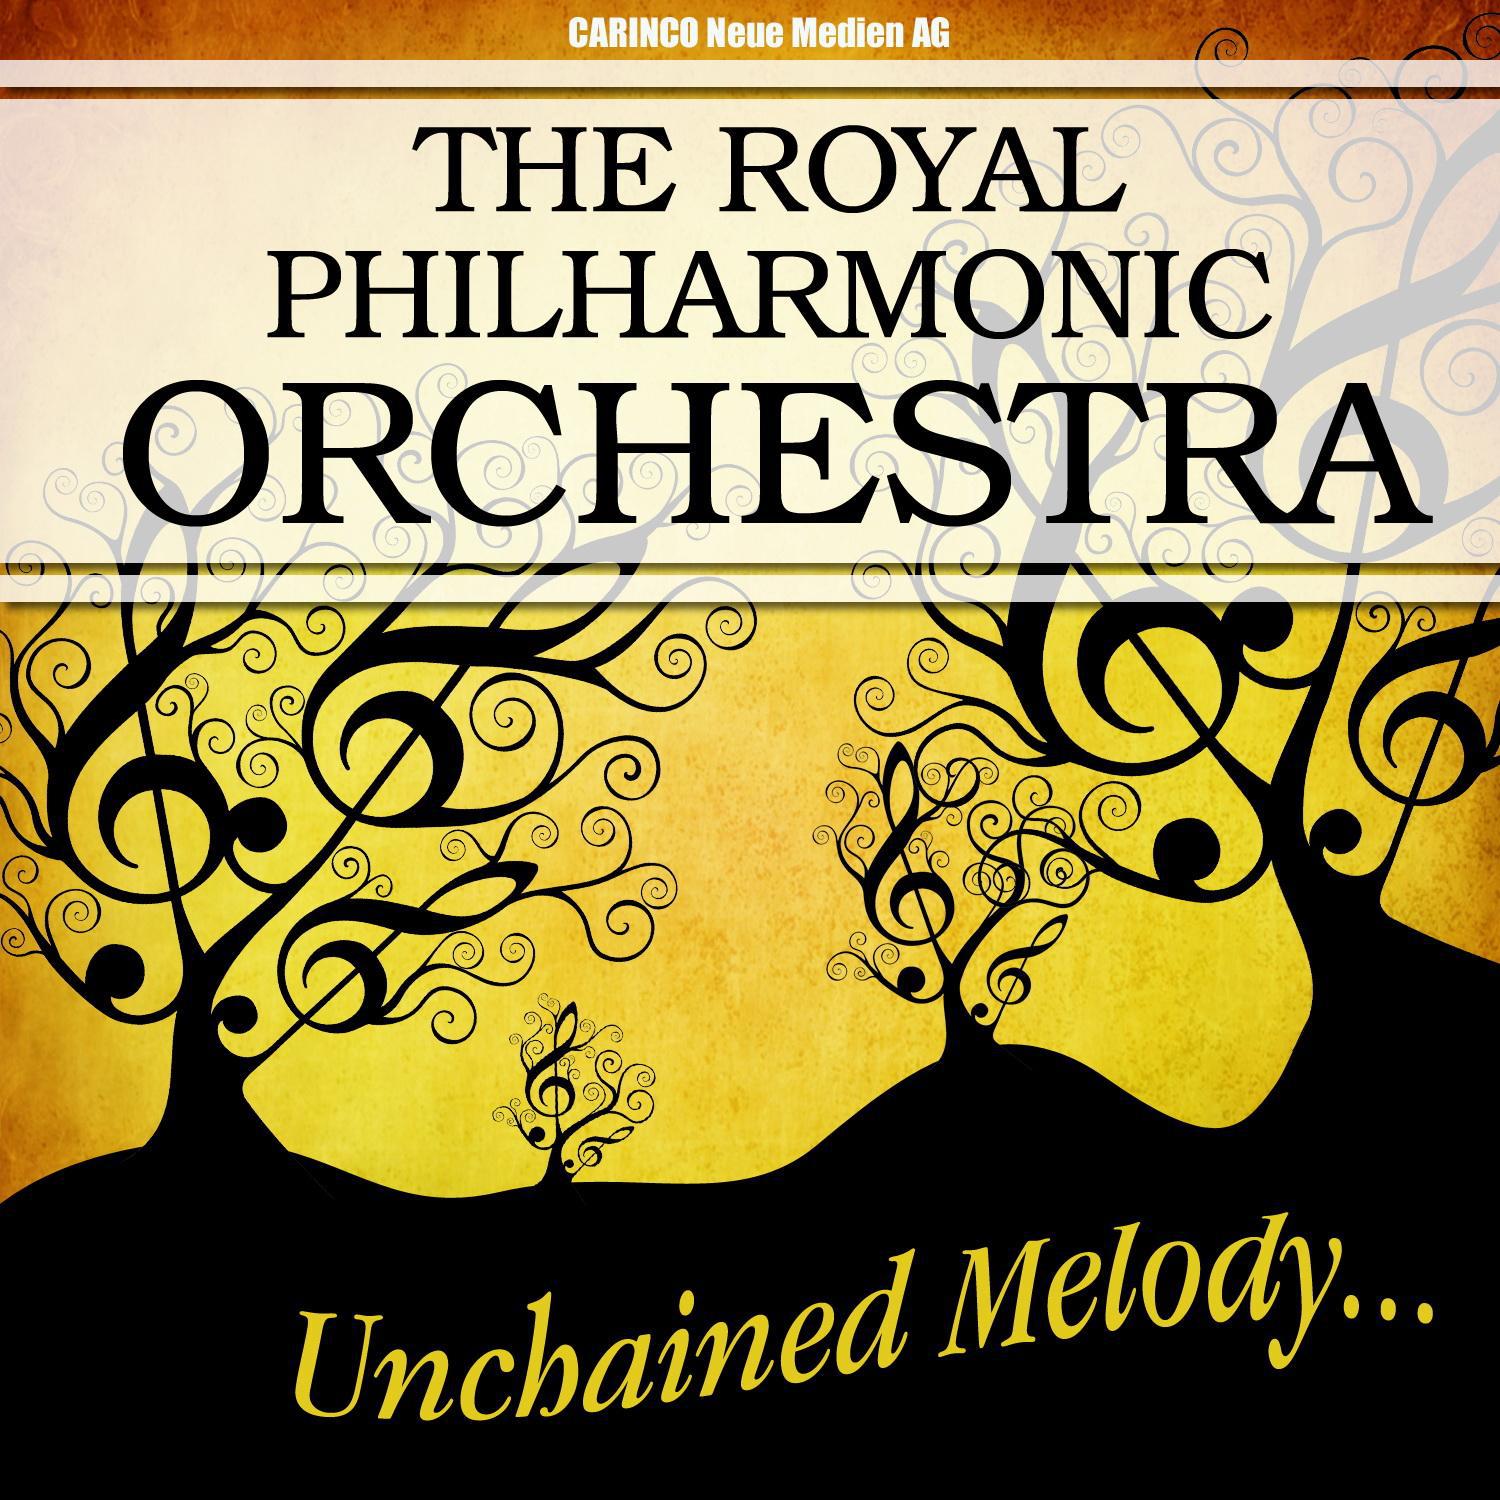 The Royal Philharmonic Orchestra - Unchained Melody